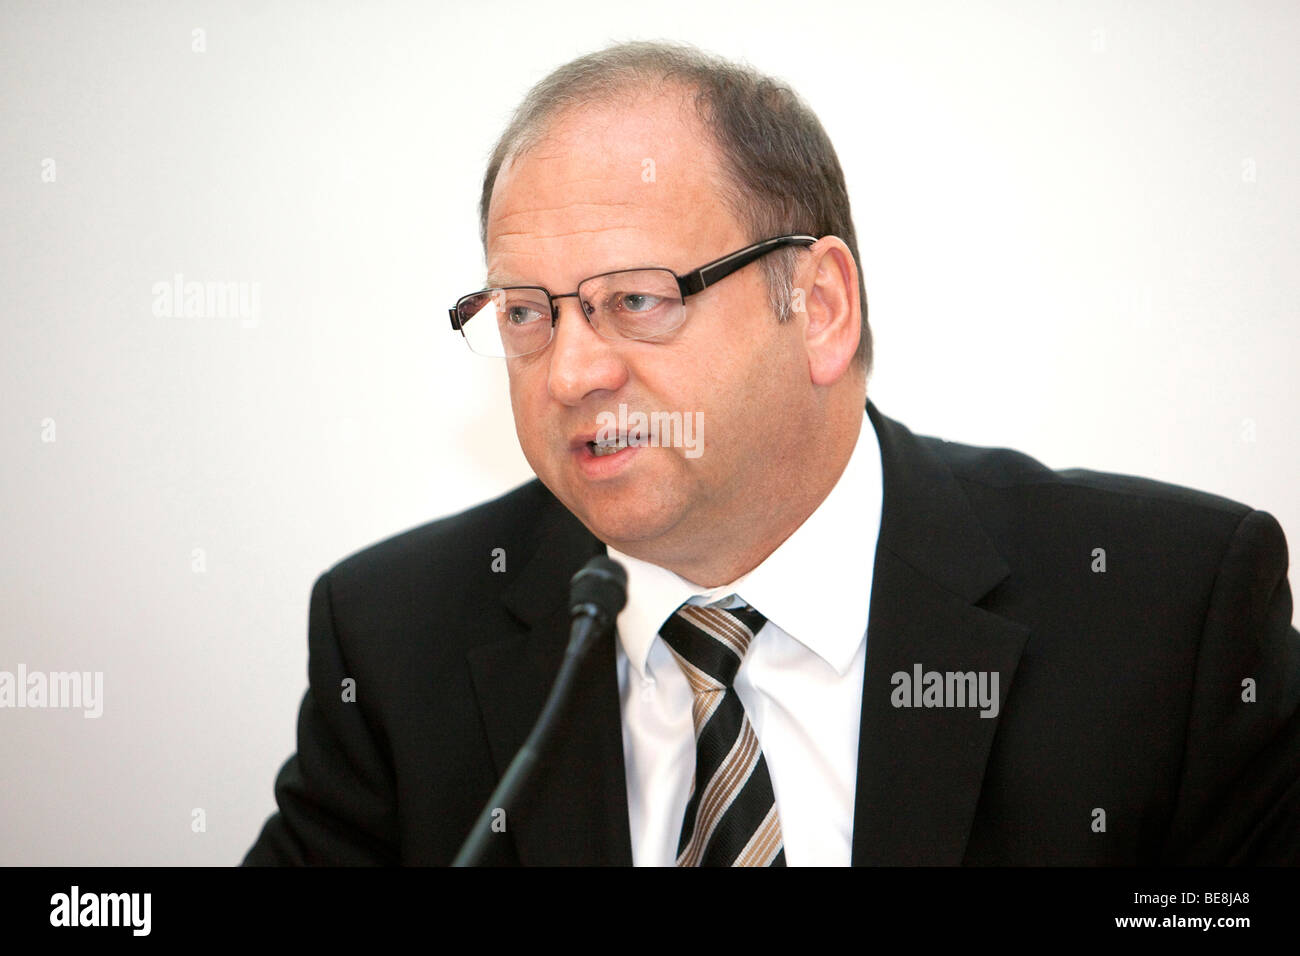 Gerald Meder, Vice Chairman of Rhoen-Klinikum AG for the cooperation of hospitals and clinics, during the annual press conferen Stock Photo